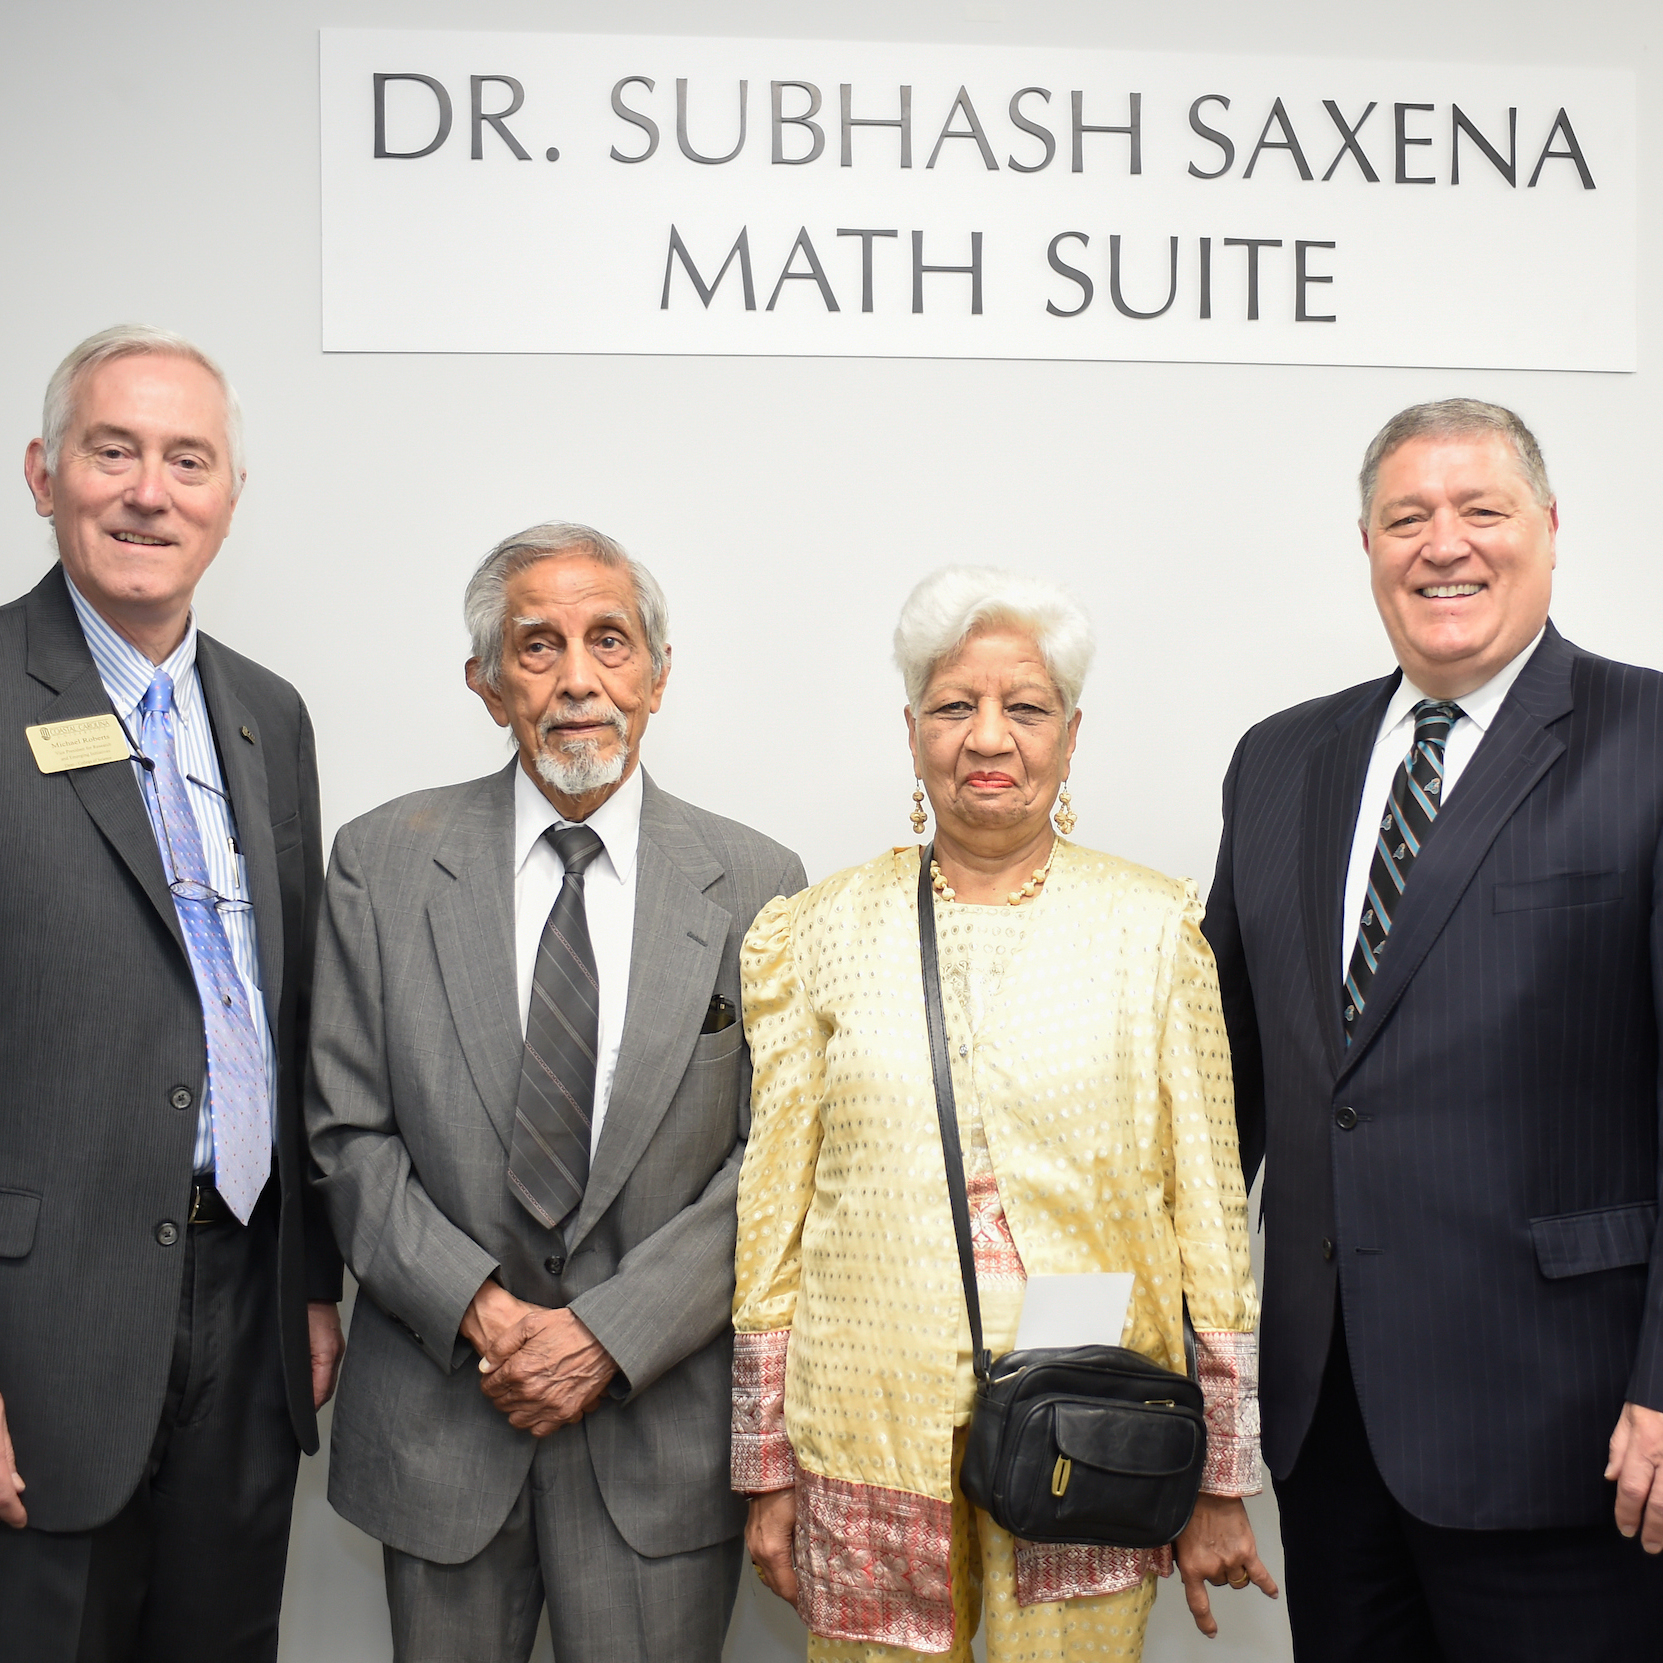 Michael Roberts, dean of the College of Science (from left); Dr. Subhash Saxena; his wife Pushpa Saxena; and David A. DeCenzo, president of CCU.